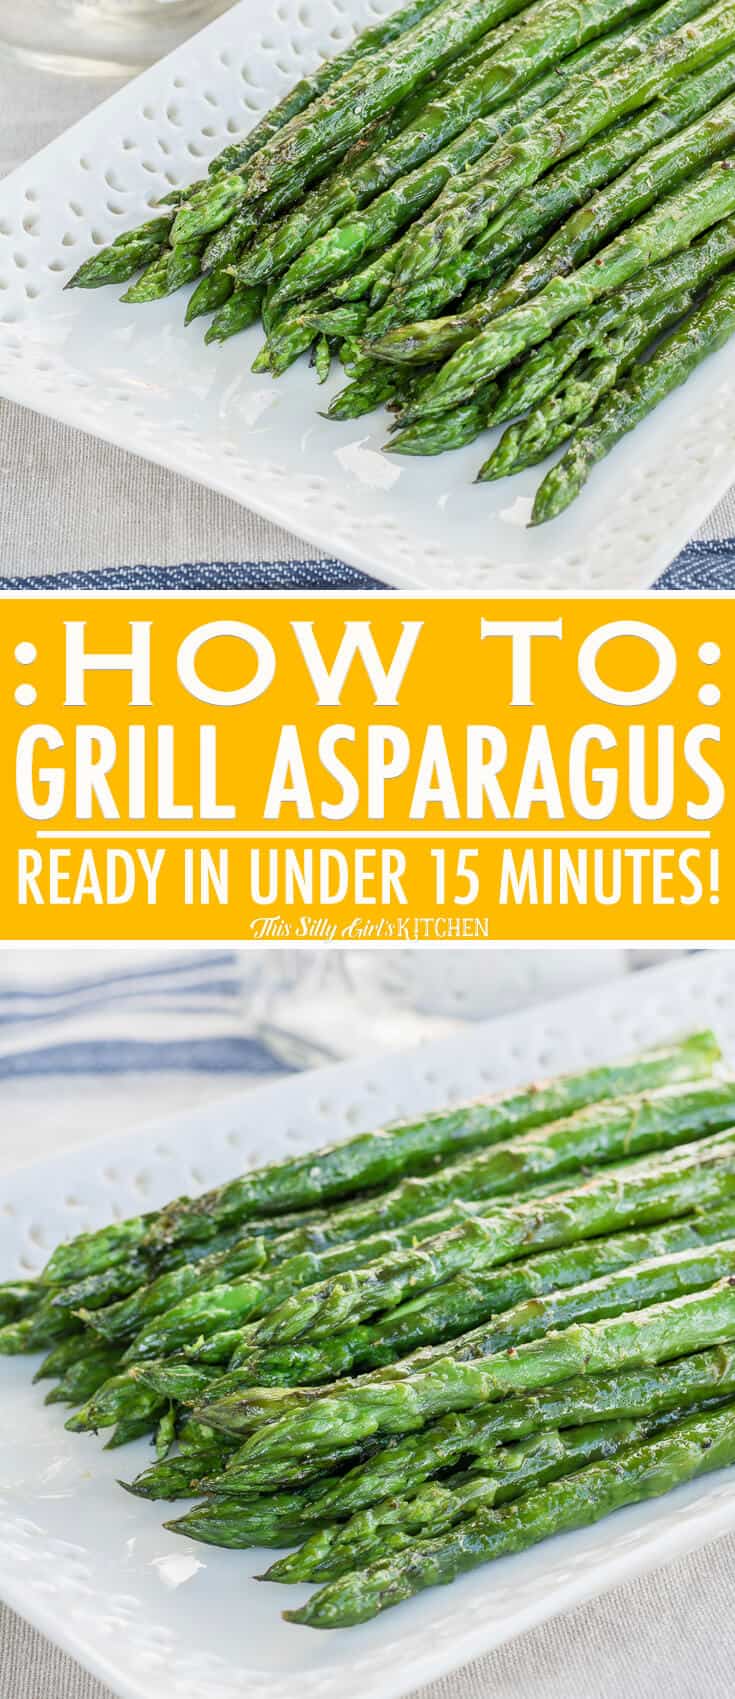 Easy Grilled Asparagus Recipe, made with 5 simple ingredients and ready in under 15 minutes! #Recipe from ThisSillyGirlsKitchen.com #asparagus #grilledasparagus